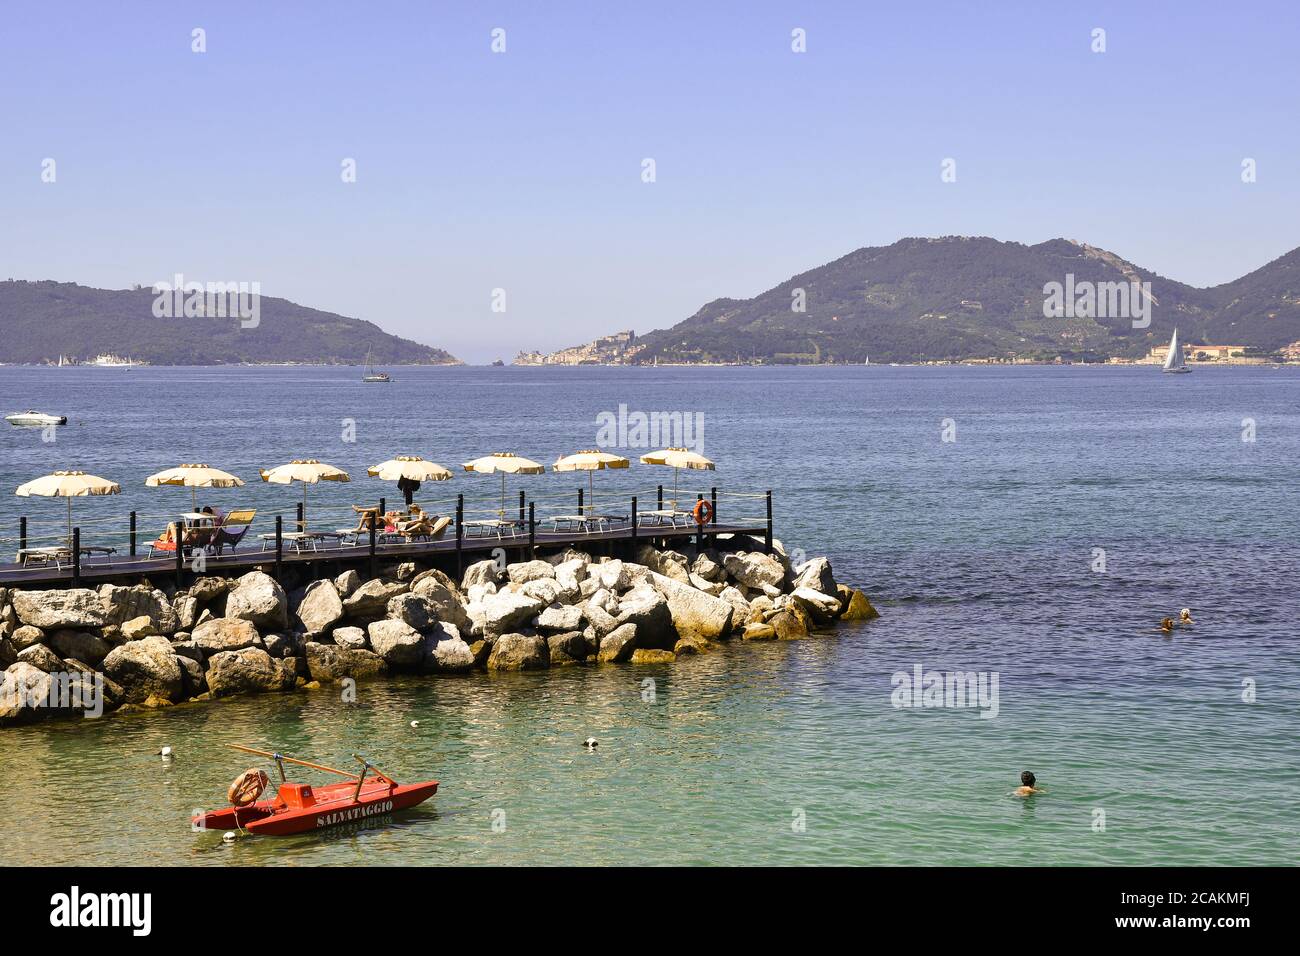 View of the Gulf of the Poets with people sunbathing on the rocky shore, the promontory of Porto Venere and the Palmaria Island, Lerici, Italy Stock Photo